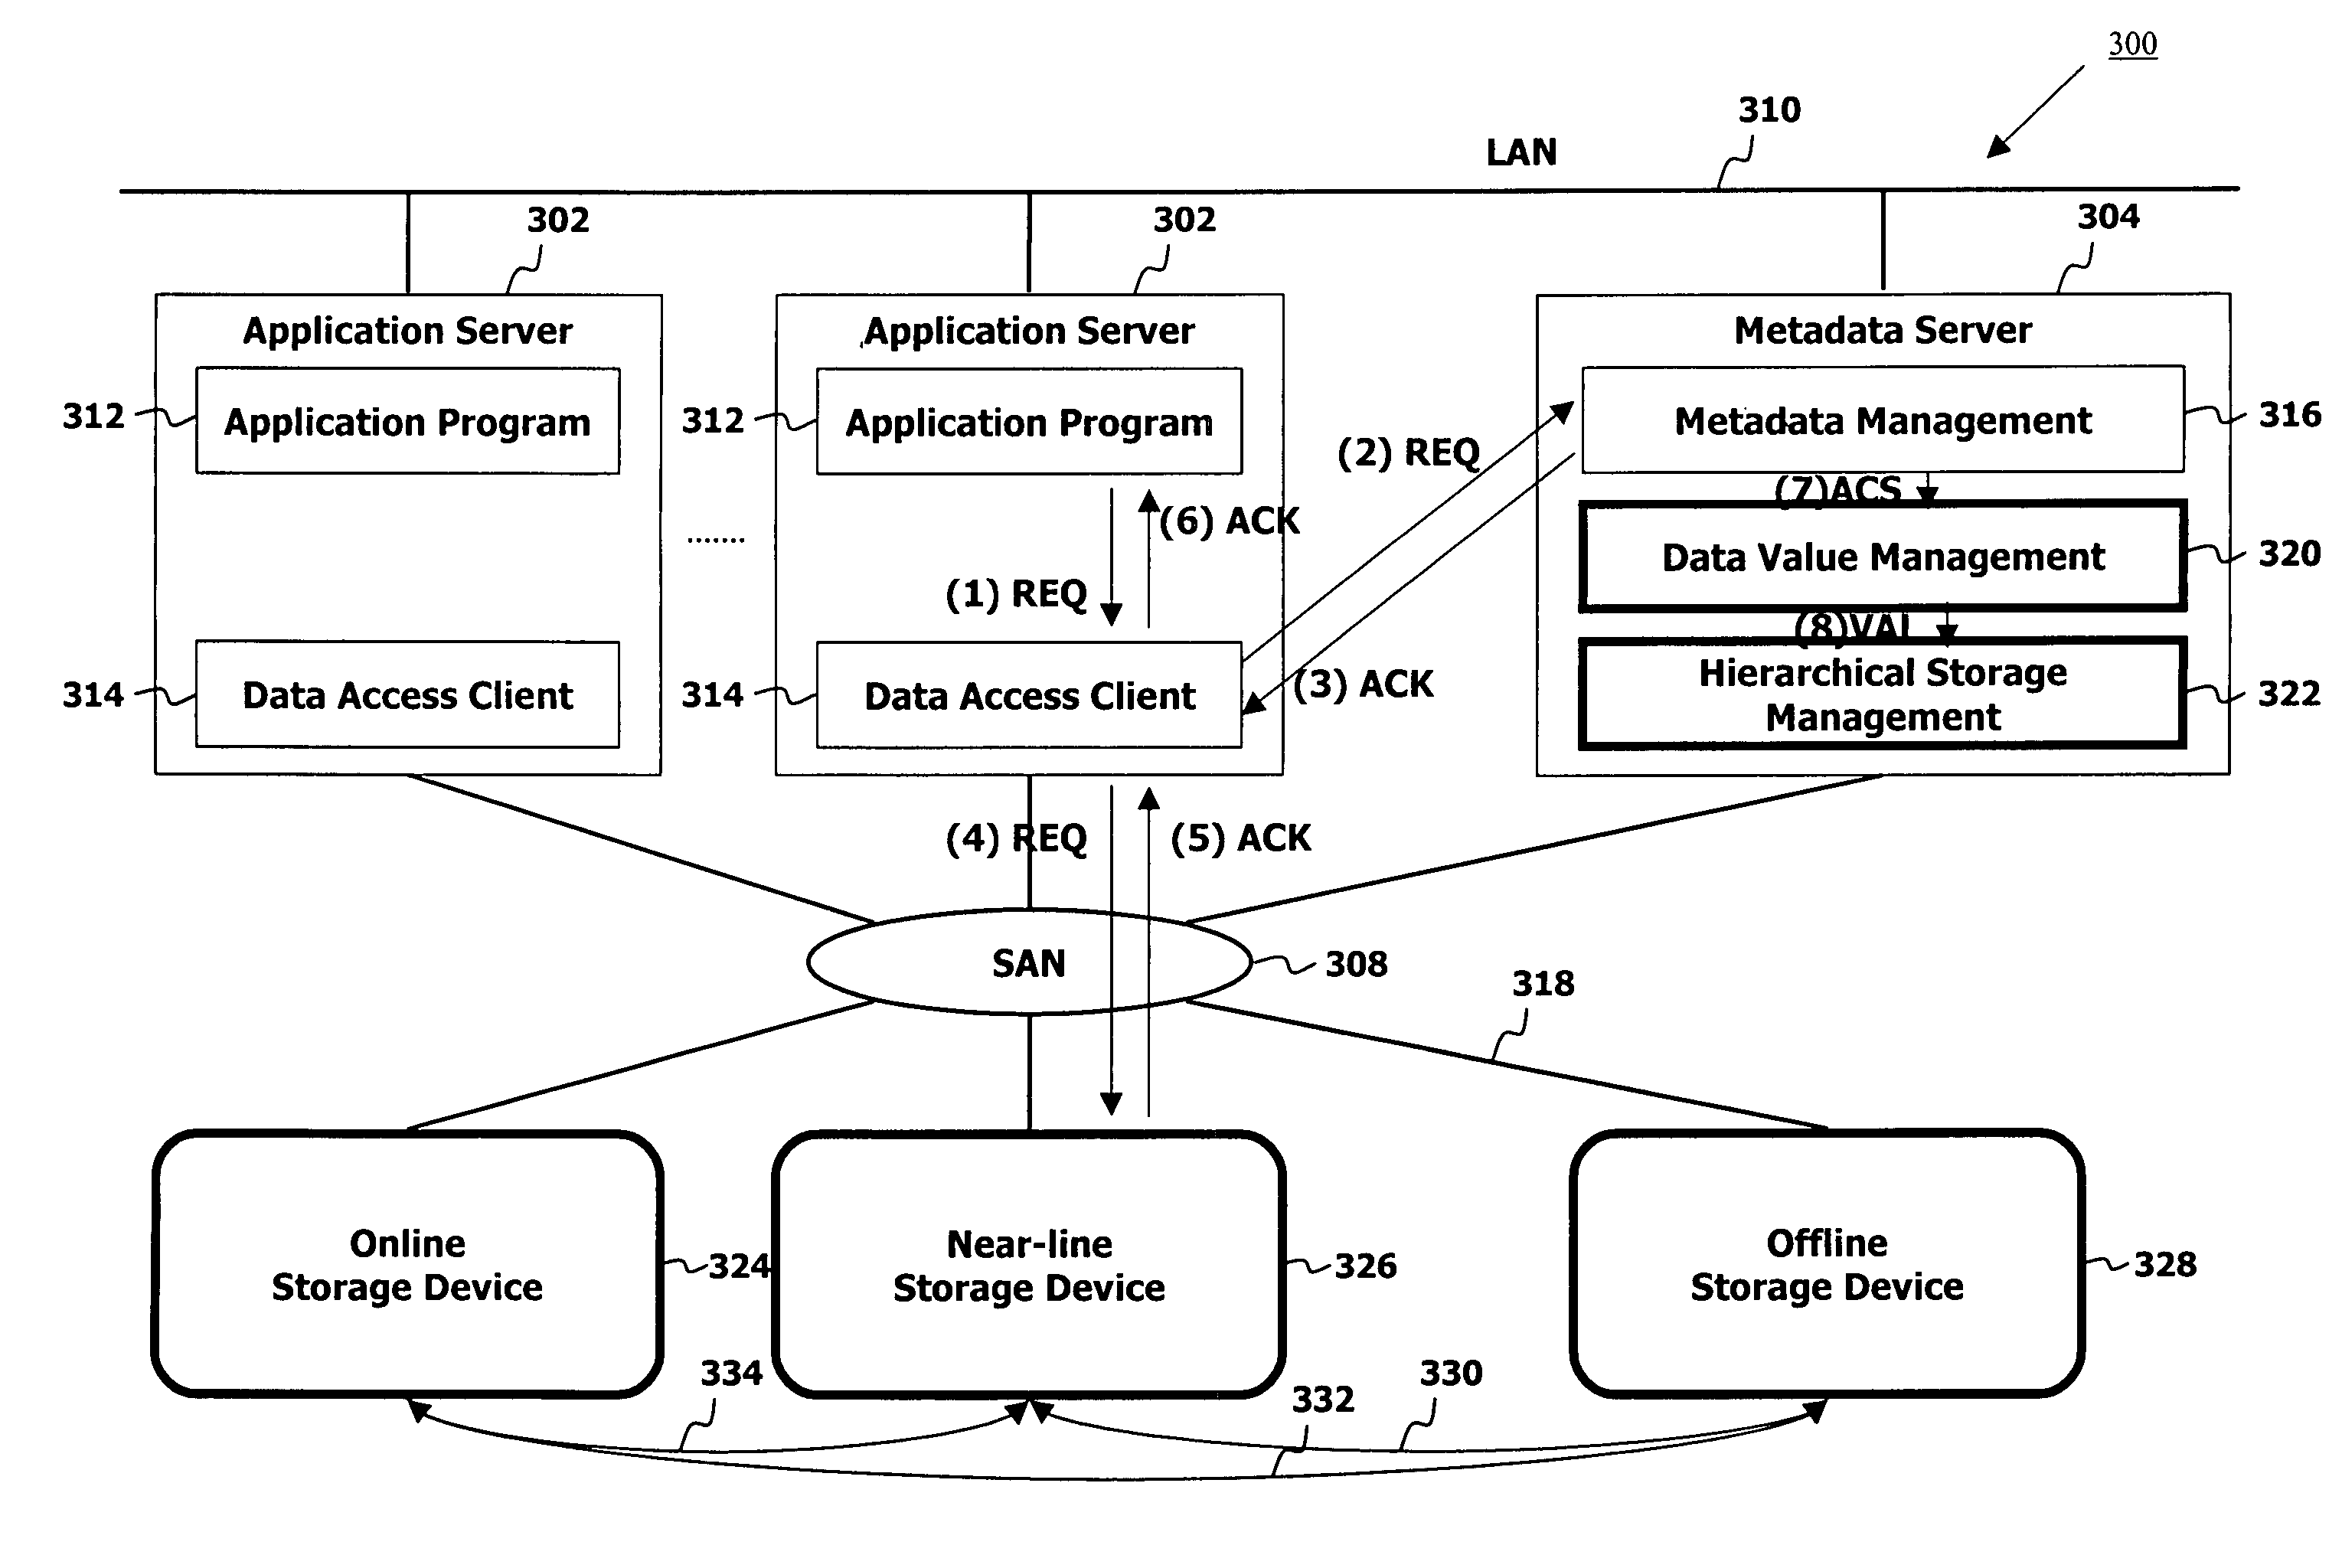 Method and apparatus for hierarchical storage management based on data value and user interest